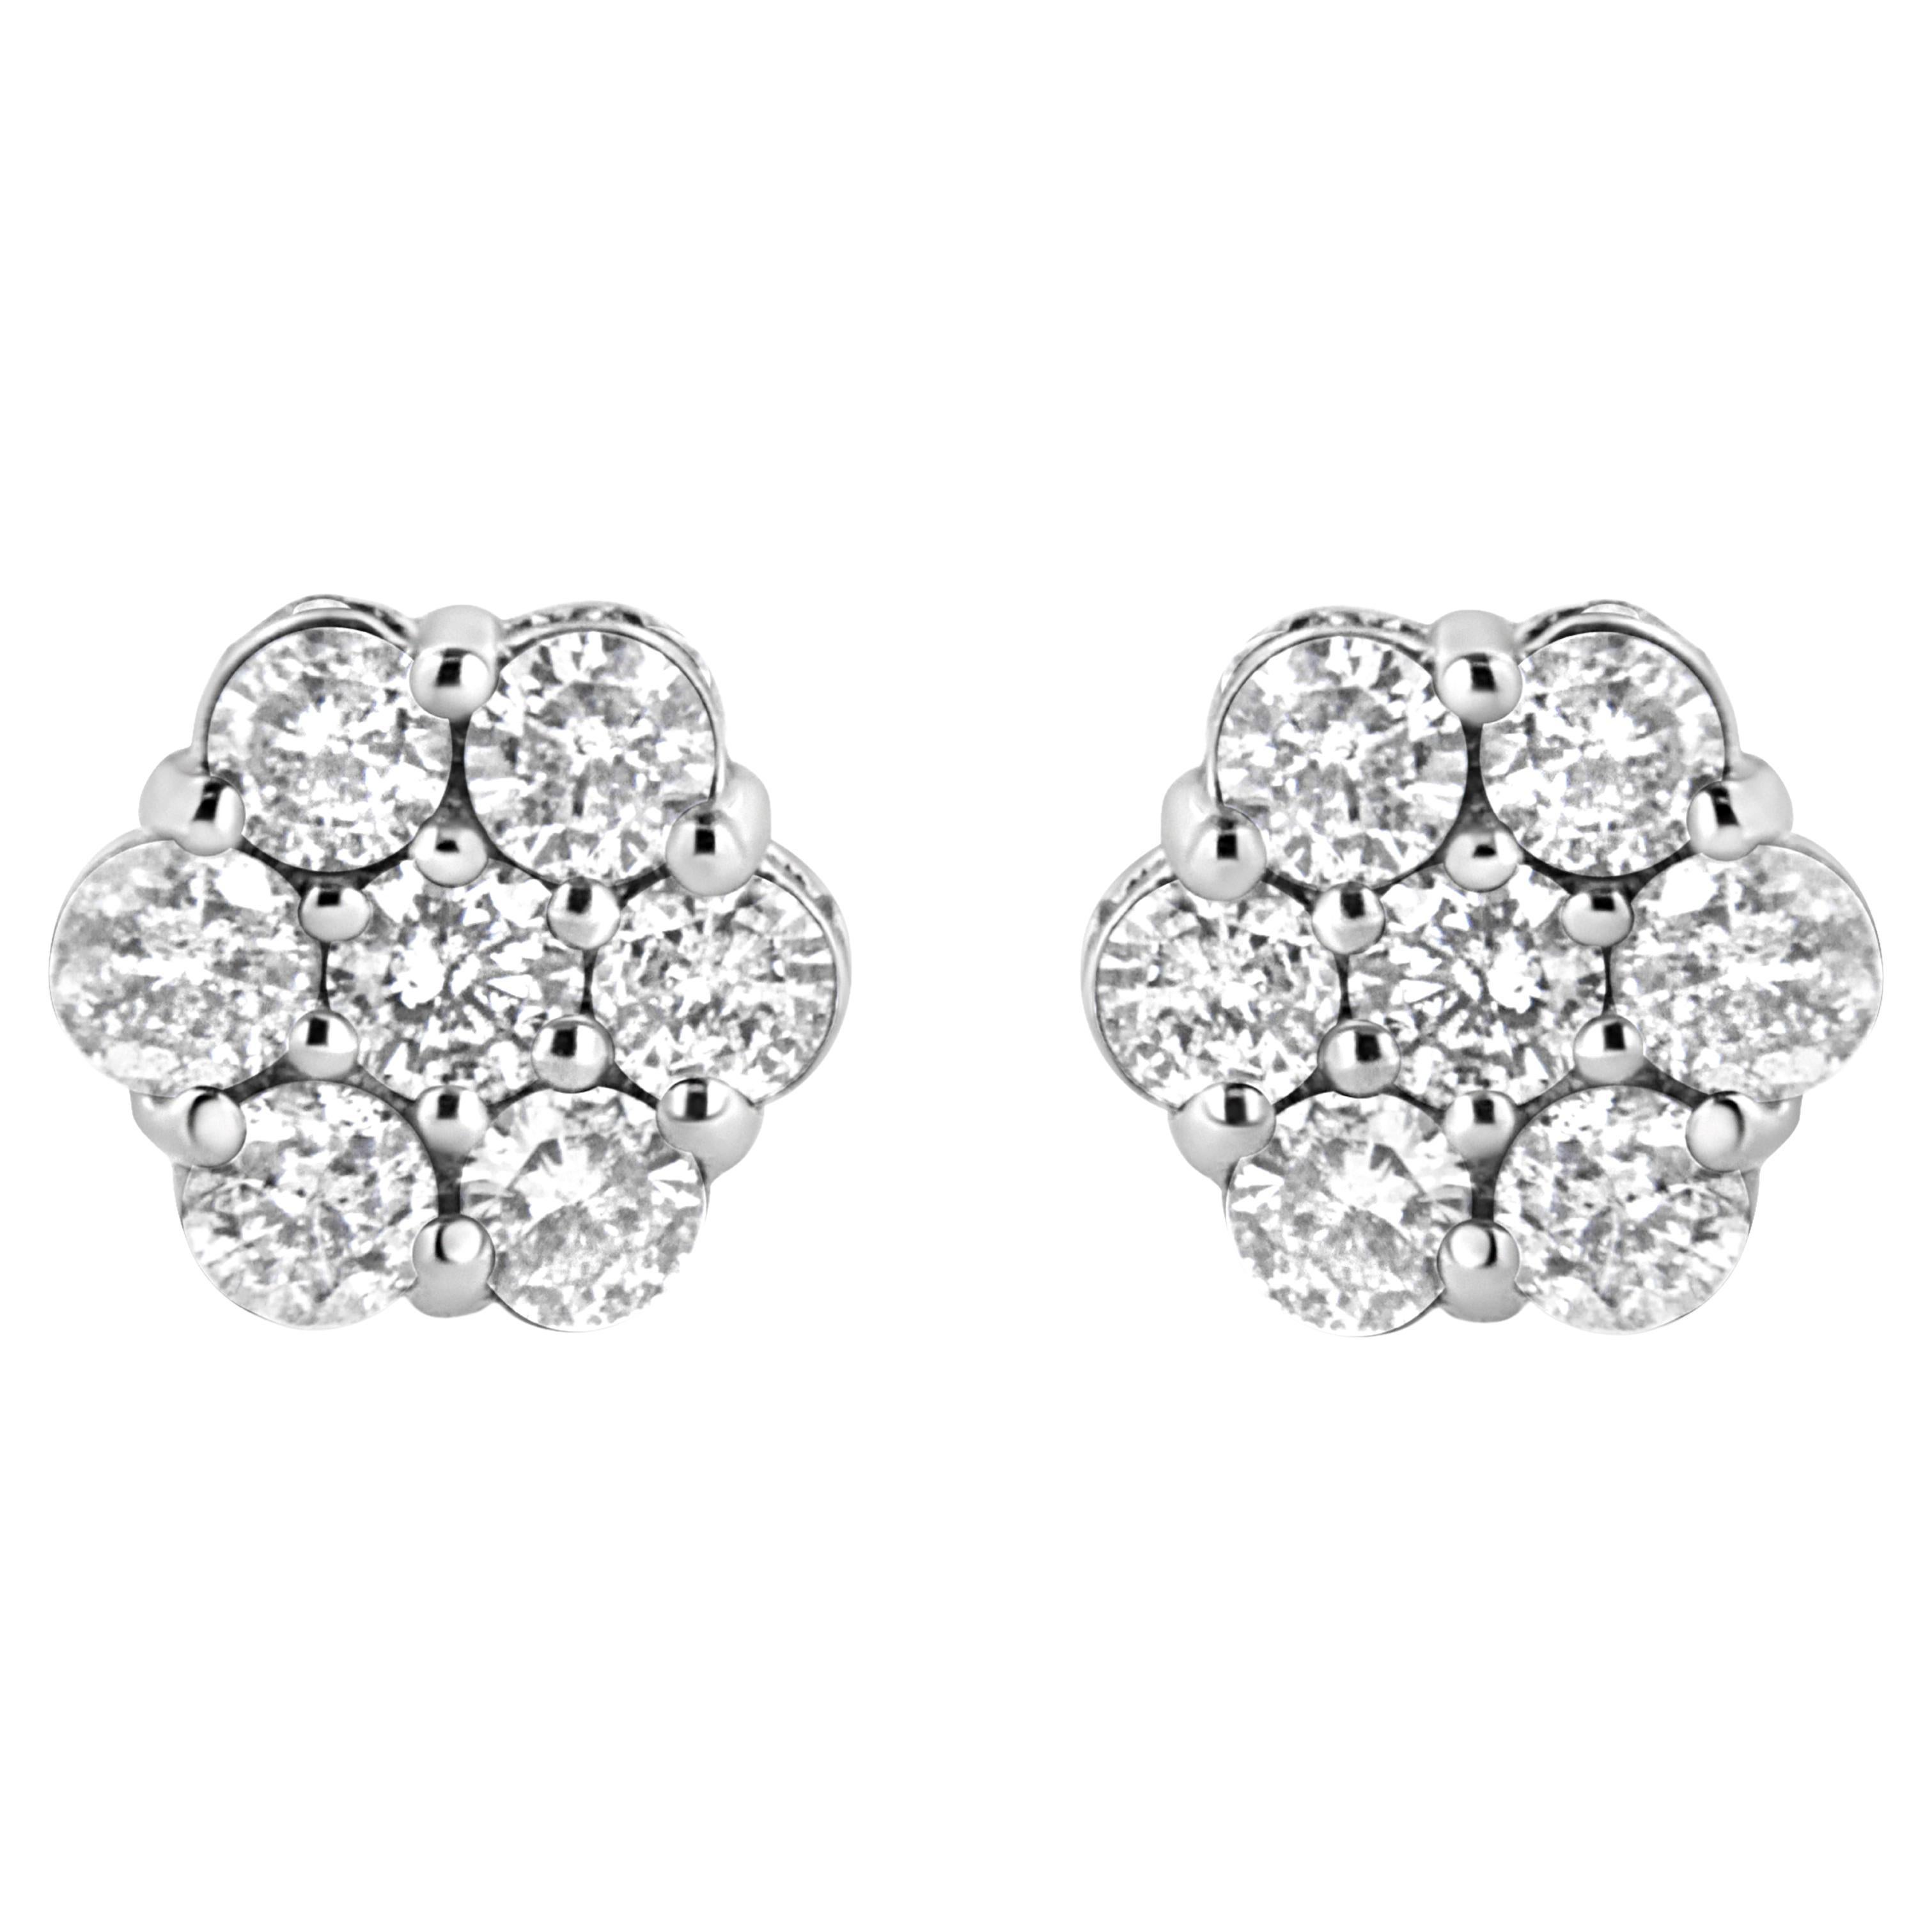 .925 Sterling Silver 1.0 Carat Diamond Cluster 7 Stone Floral Stud Earrings For Sale